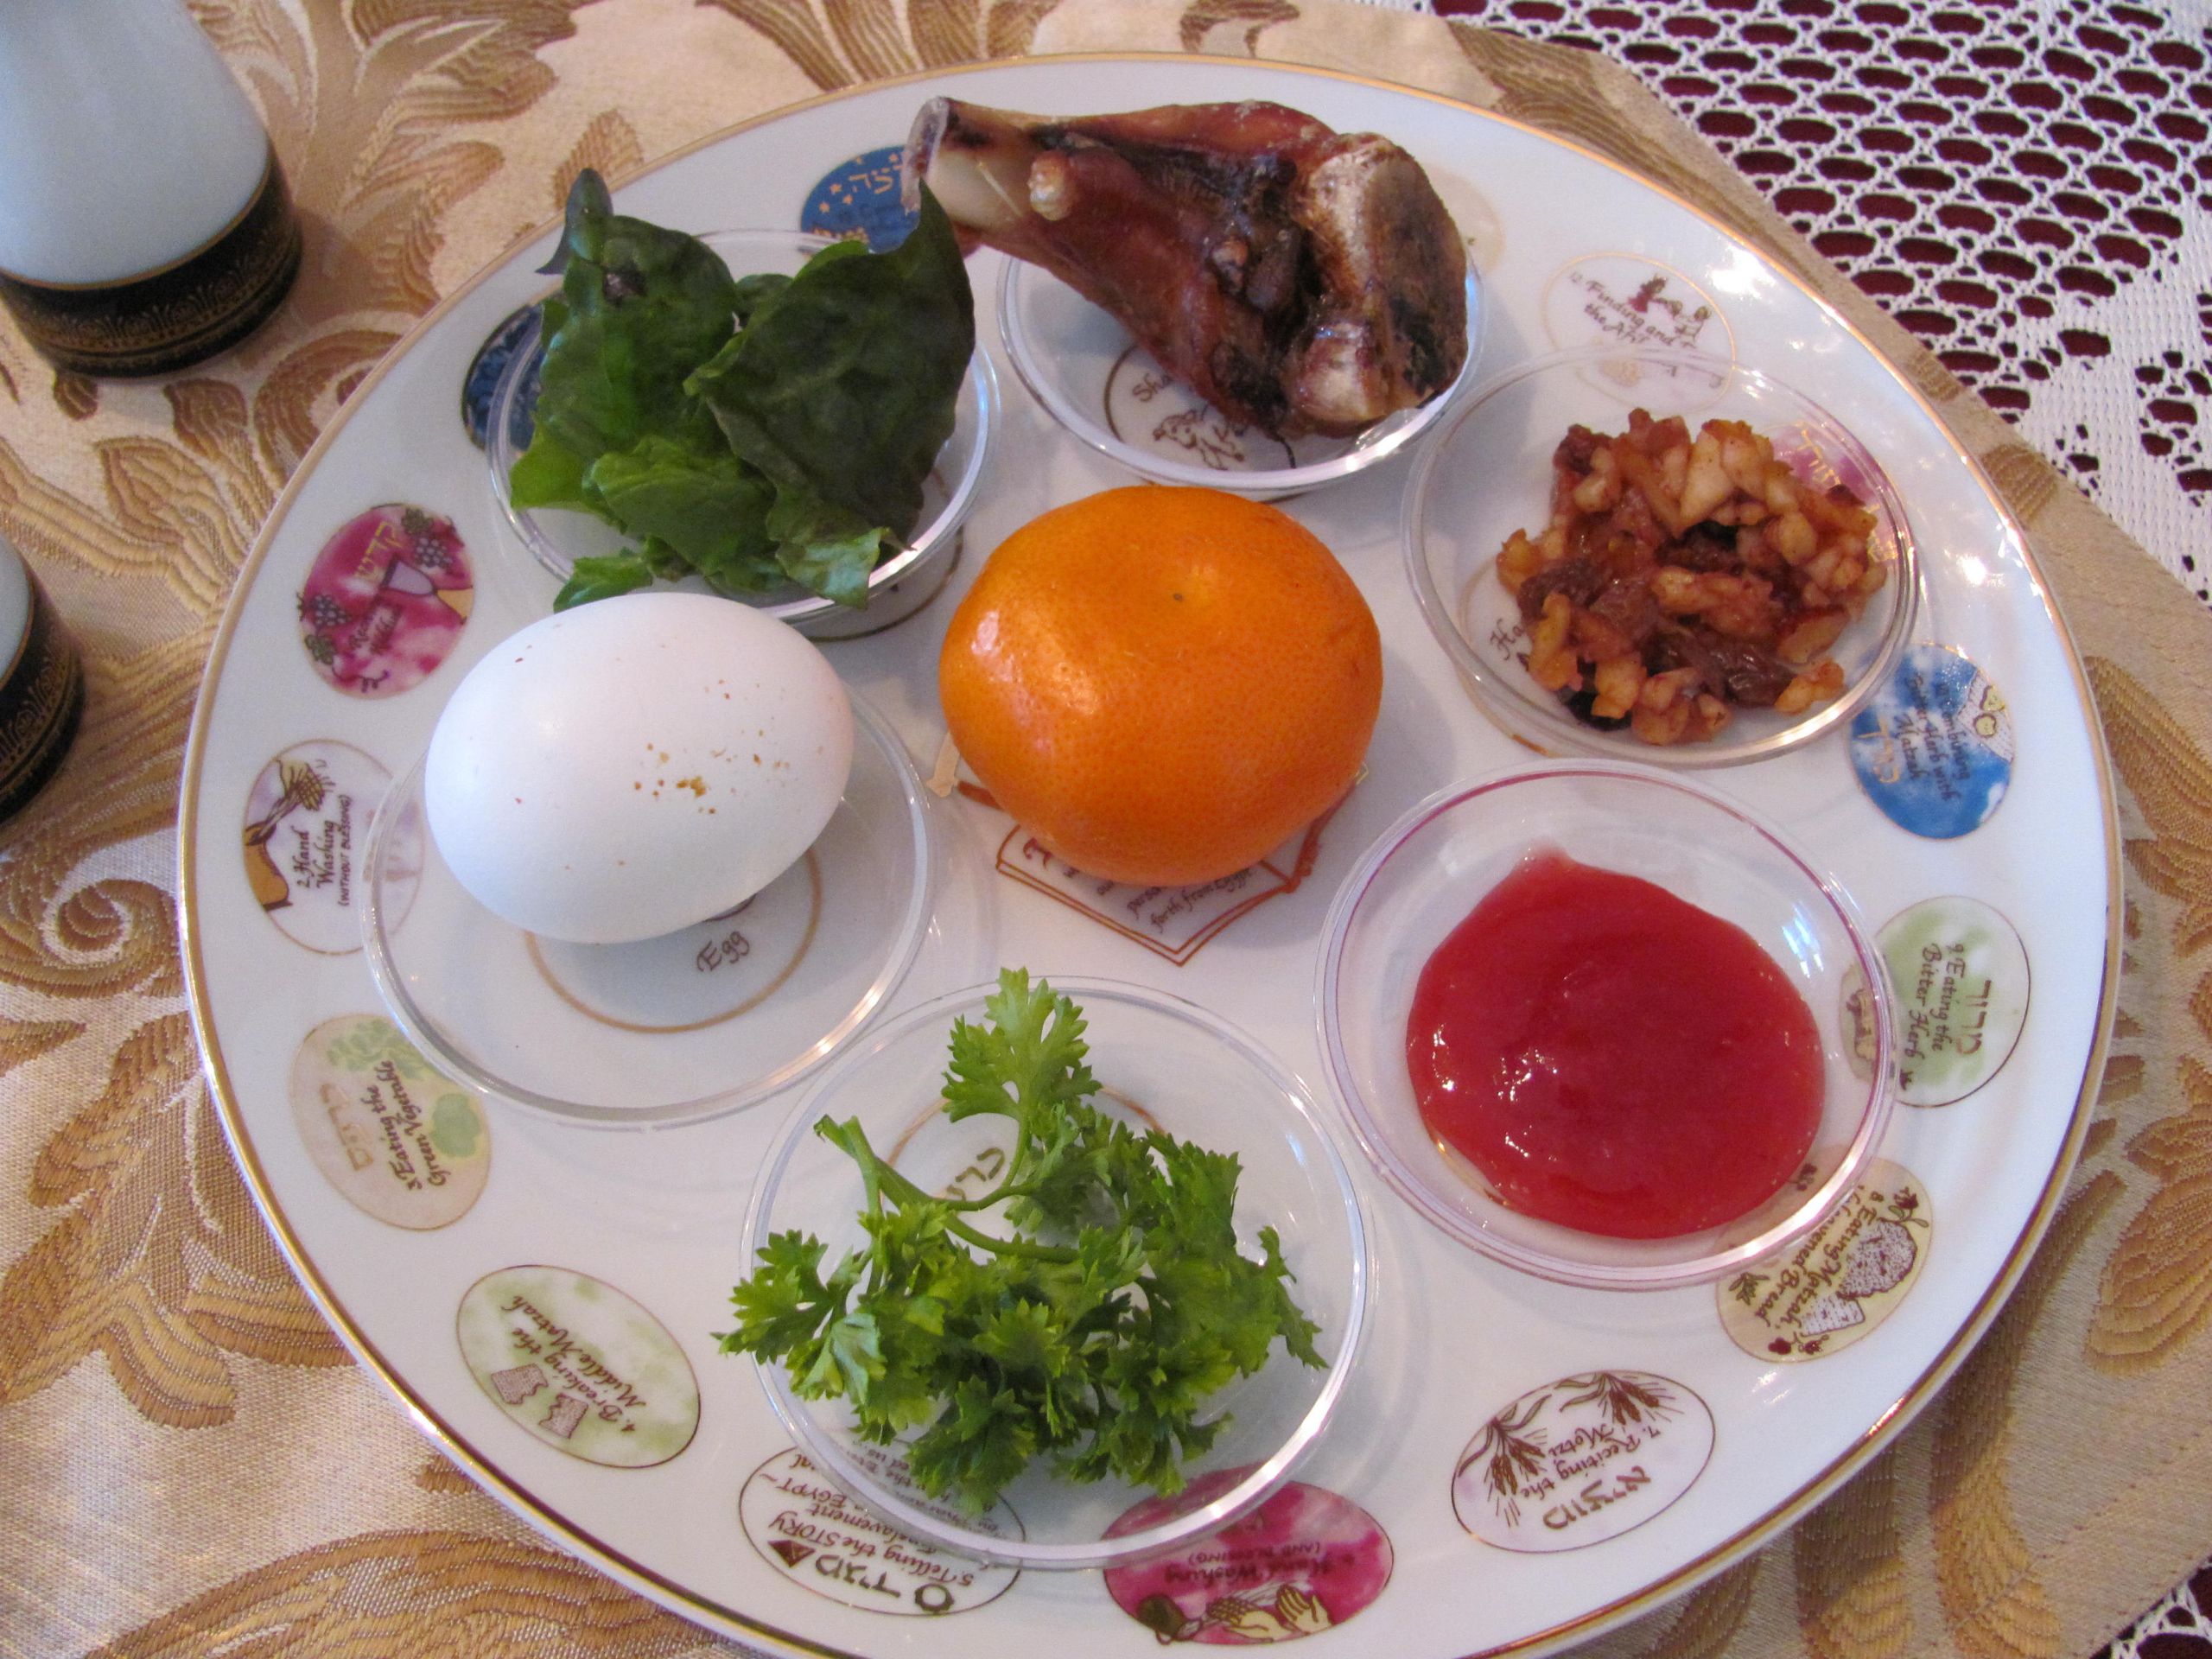 Passover Seder Food
 Passover Seder Prayers and The Meaning of the Seder Foods